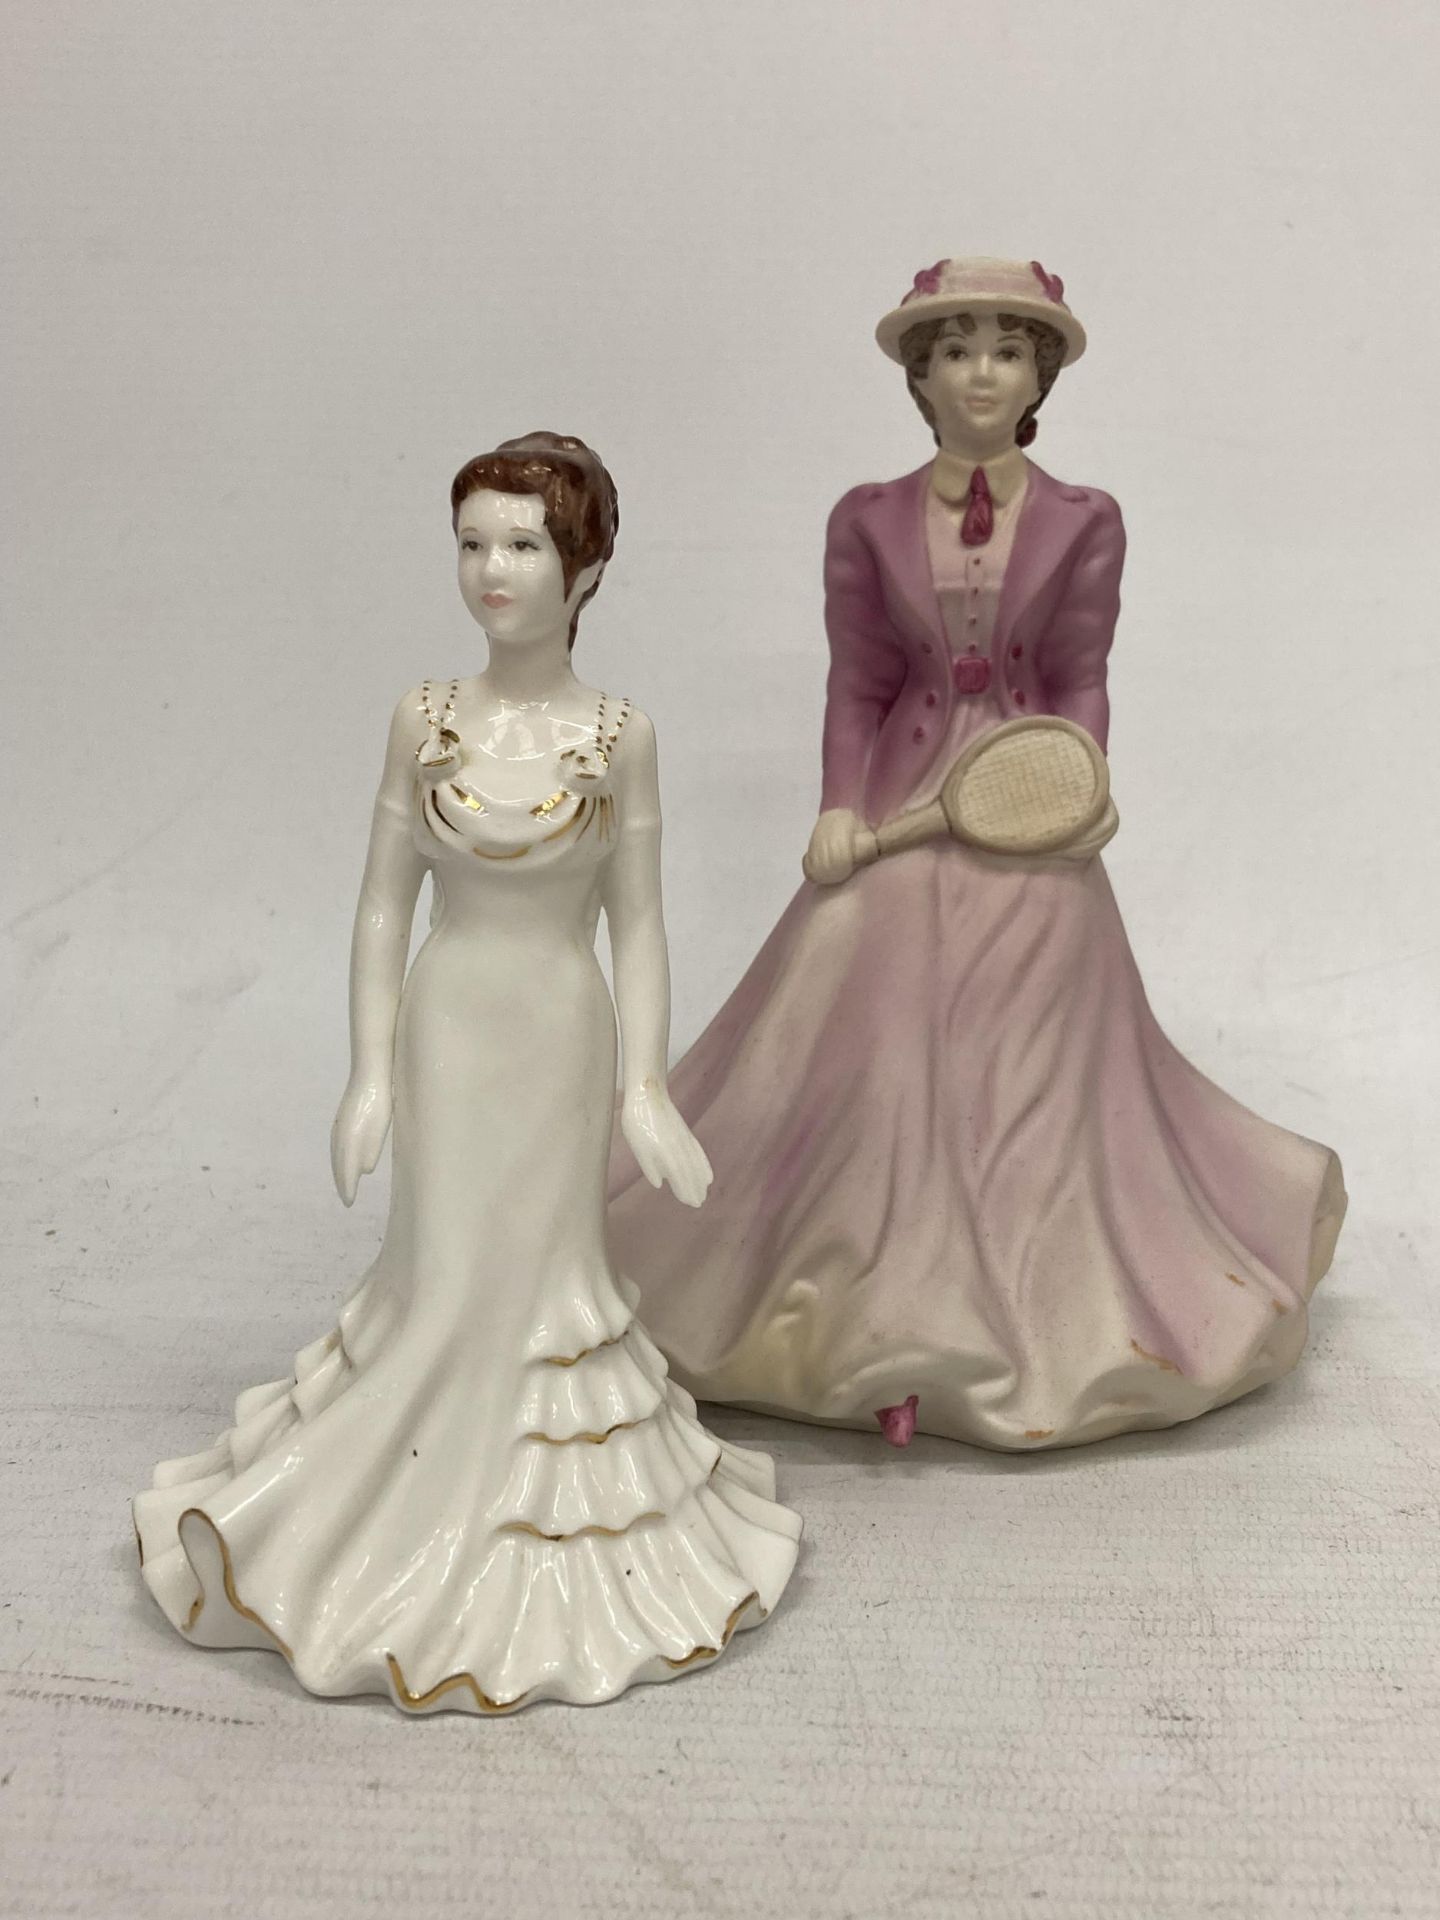 TWO COALPORT FIGURINES "CRYSTAL" AND "BEAU MONDE ON COURT"